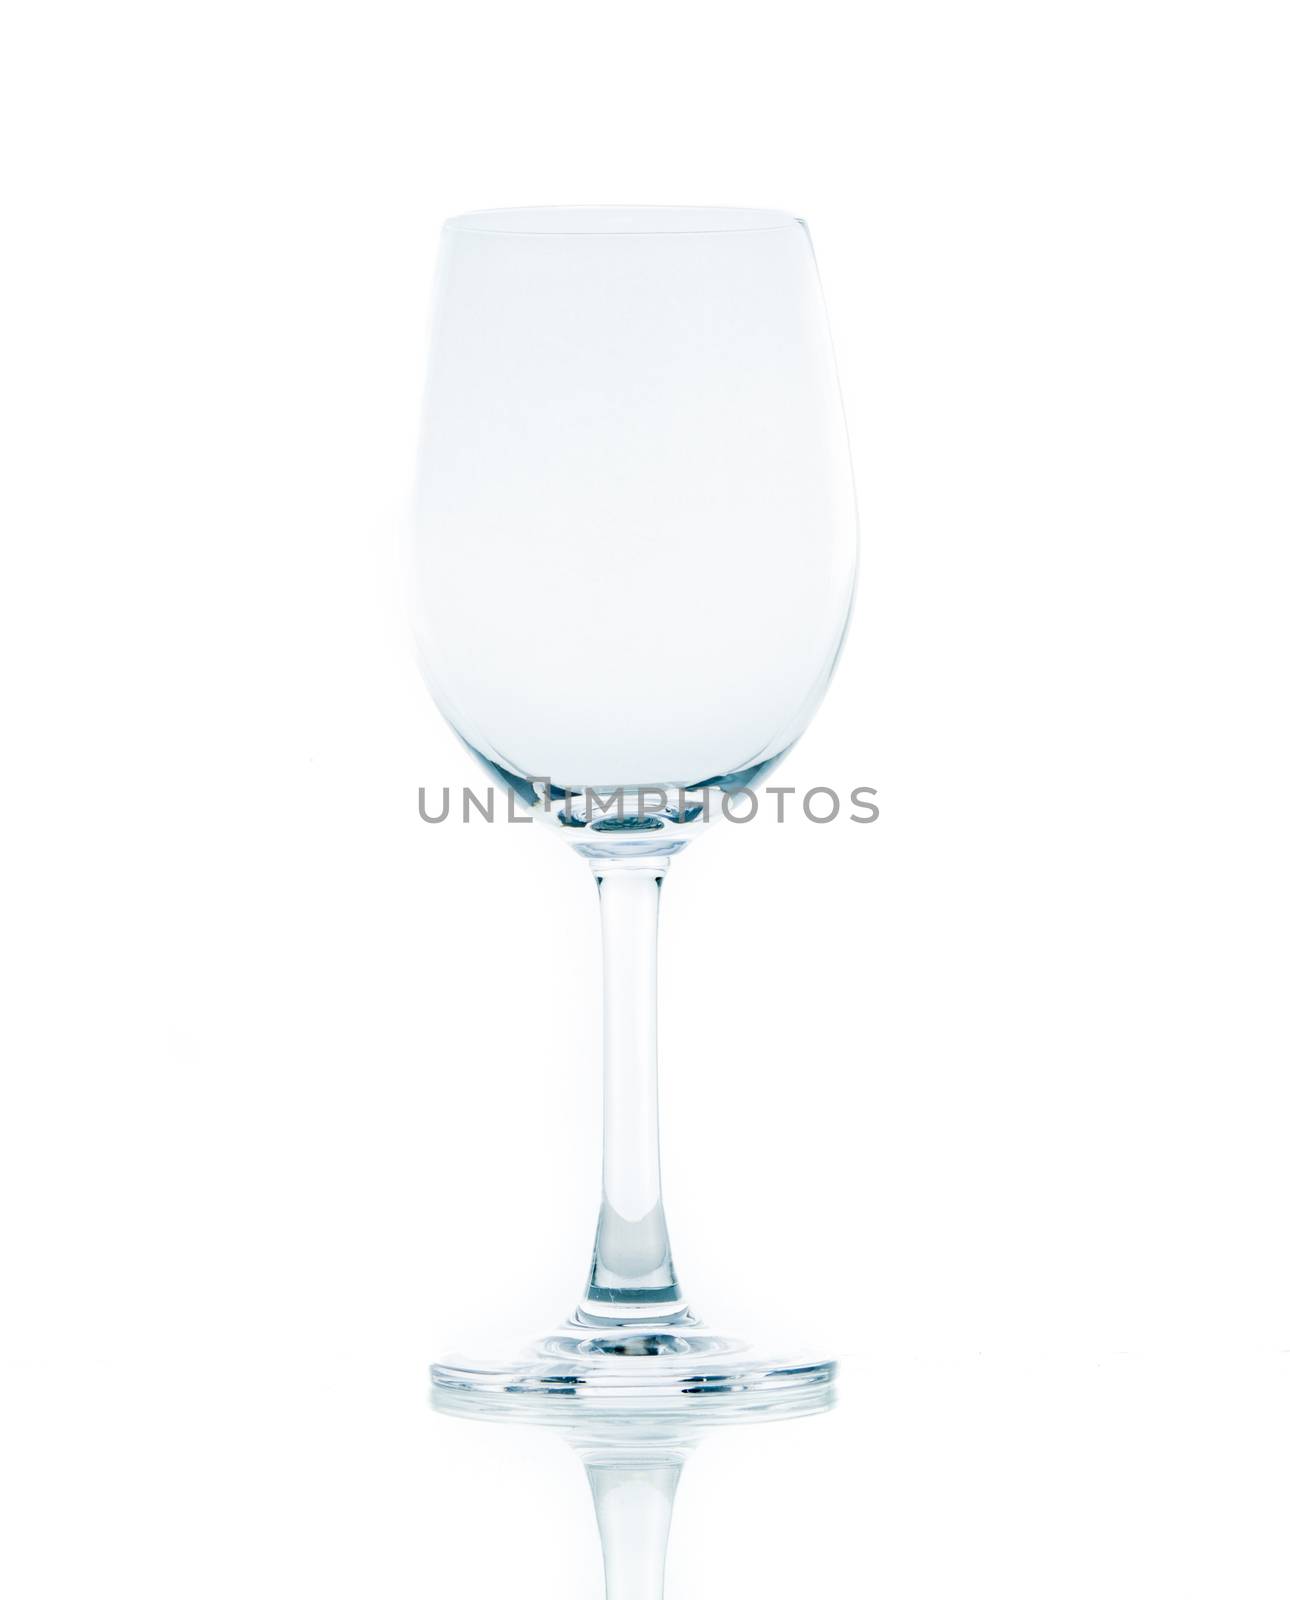 Glass water clear isolate on over white background